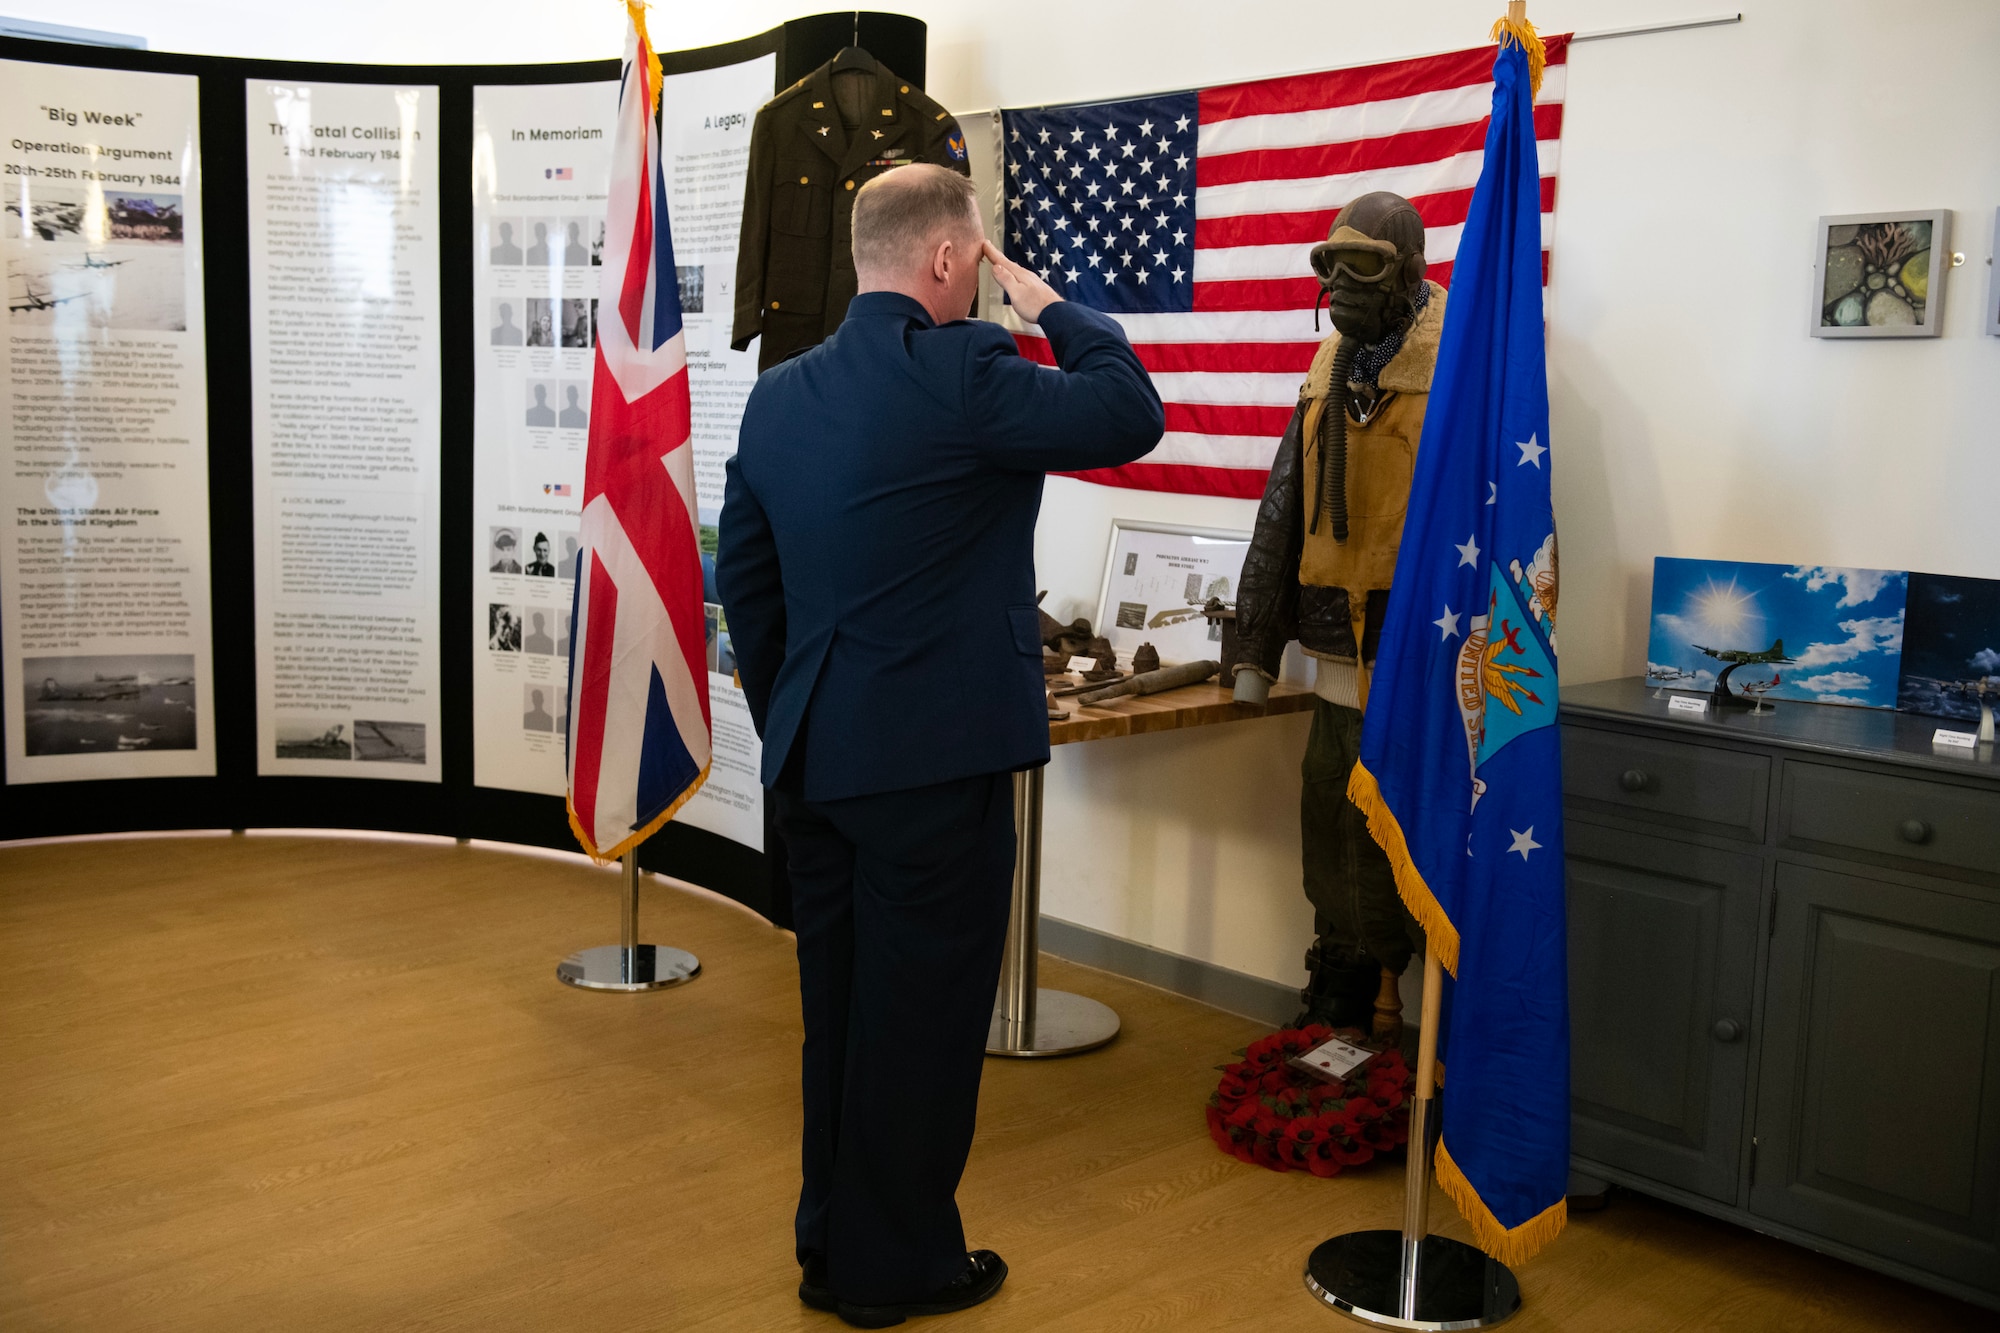 U.S. Air Force Col. D. Landon Phillips, 501st Combat Support Wing commander, salutes while taps is played during wreath laying at a Ceremony of Remembrance at Stanwick Lakes, England, Feb. 22, 2024. U.S. and U.K. leaders gathered to honor 17 Airmen who died in a midair collision on Feb. 22, 1944, involving B-17 Flying Fortresses from the 303rd Bombardment Group at RAF Molesworth and the 384th Bombardment Group at RAF Grafton Underwood. The Airmen were part of Operation Argument, or "The Big Week," targeting enemy industrial sites and aircraft facilities in Central Europe to secure Allied air superiority for the upcoming landings in France in June 1944. (U.S. Air Force photo by Staff Sgt. Jennifer Zima)